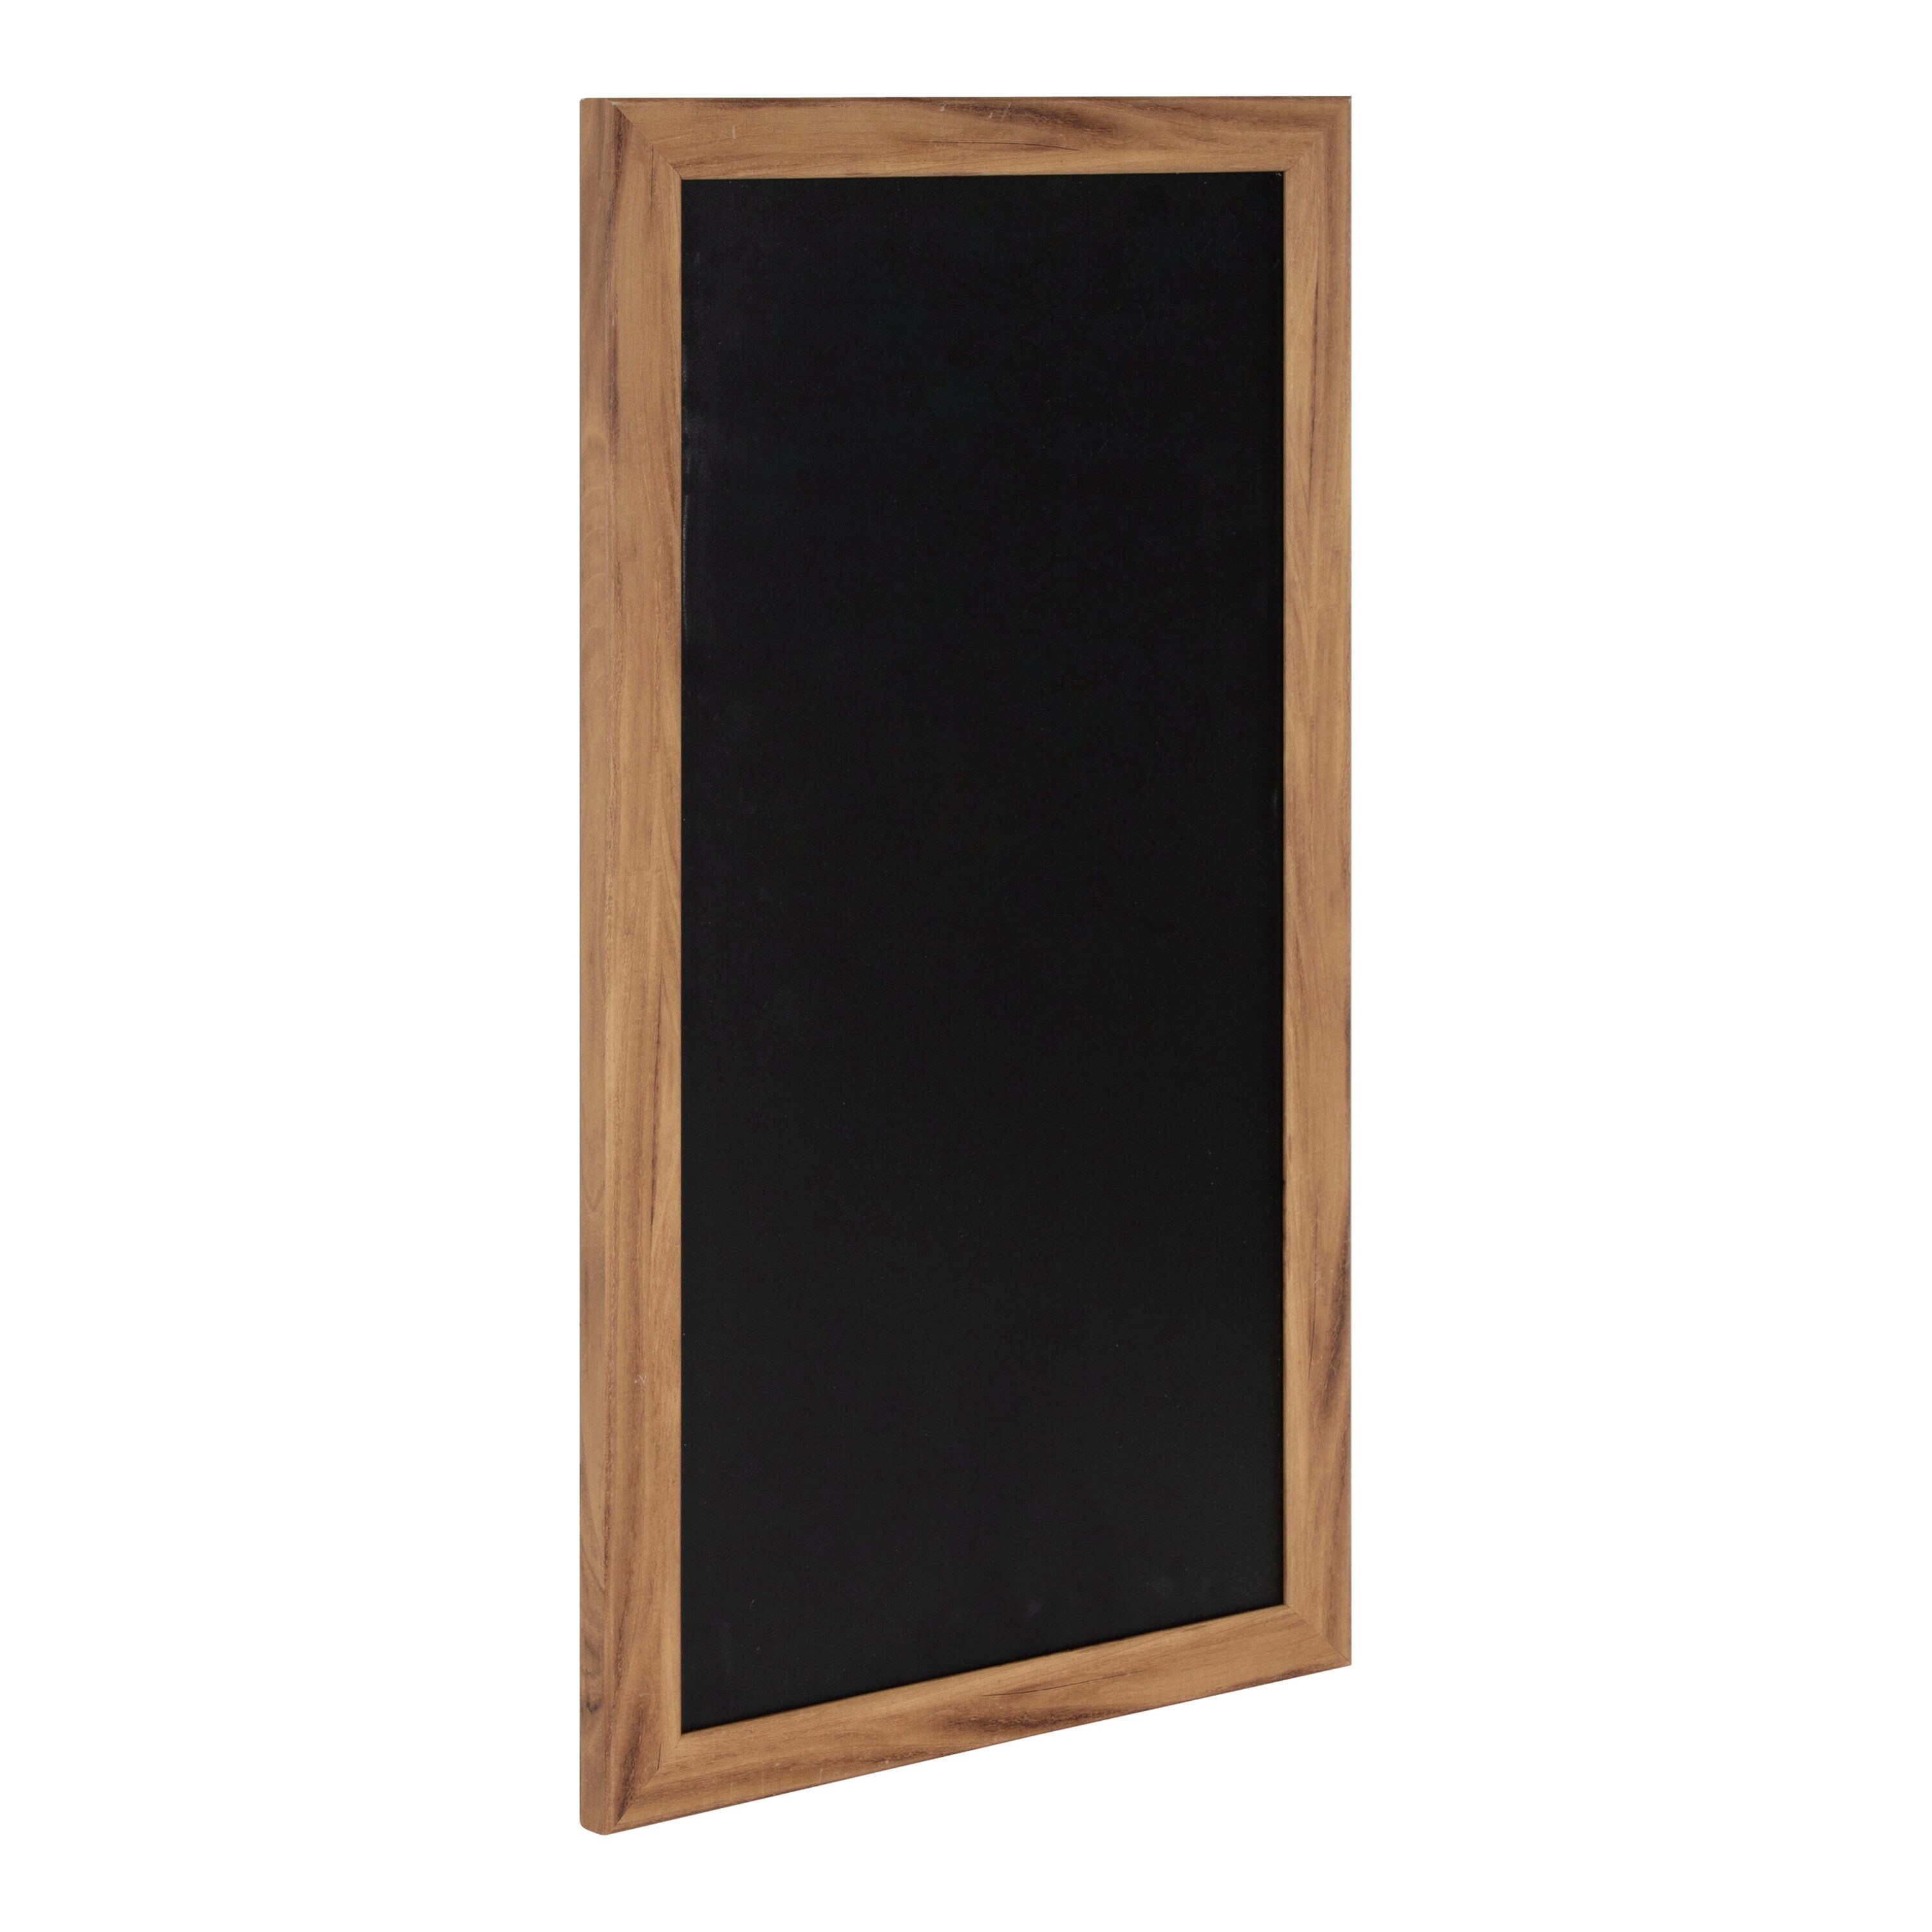 Wooden Rustic Magnetic Chalkboard Brown Wall Mounted Entryway Cabinet 